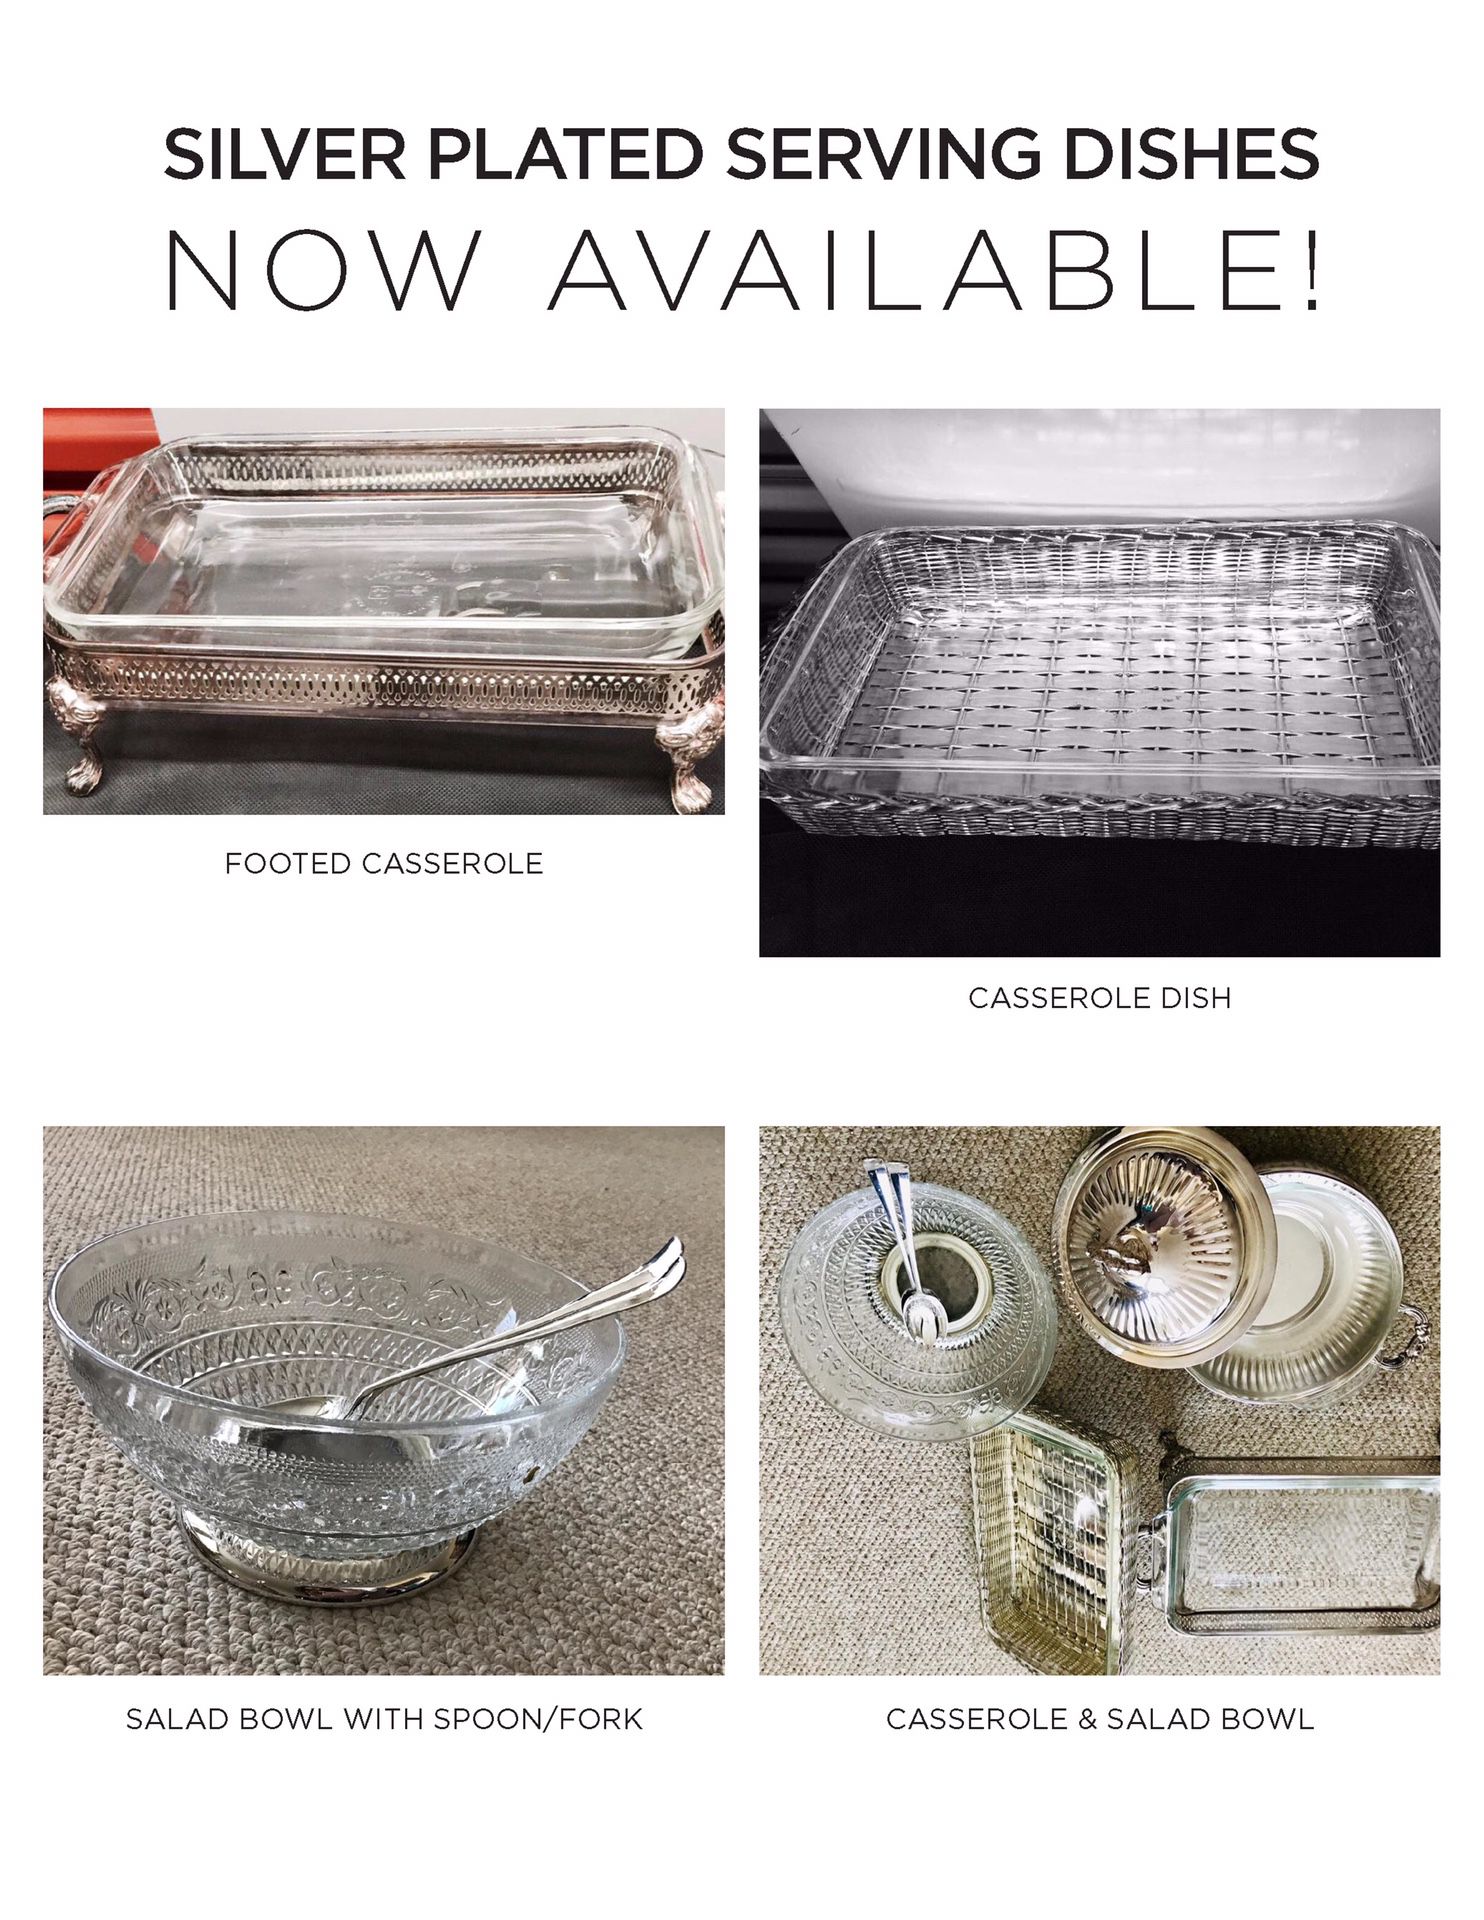 Silver Plated Casserole Dishes